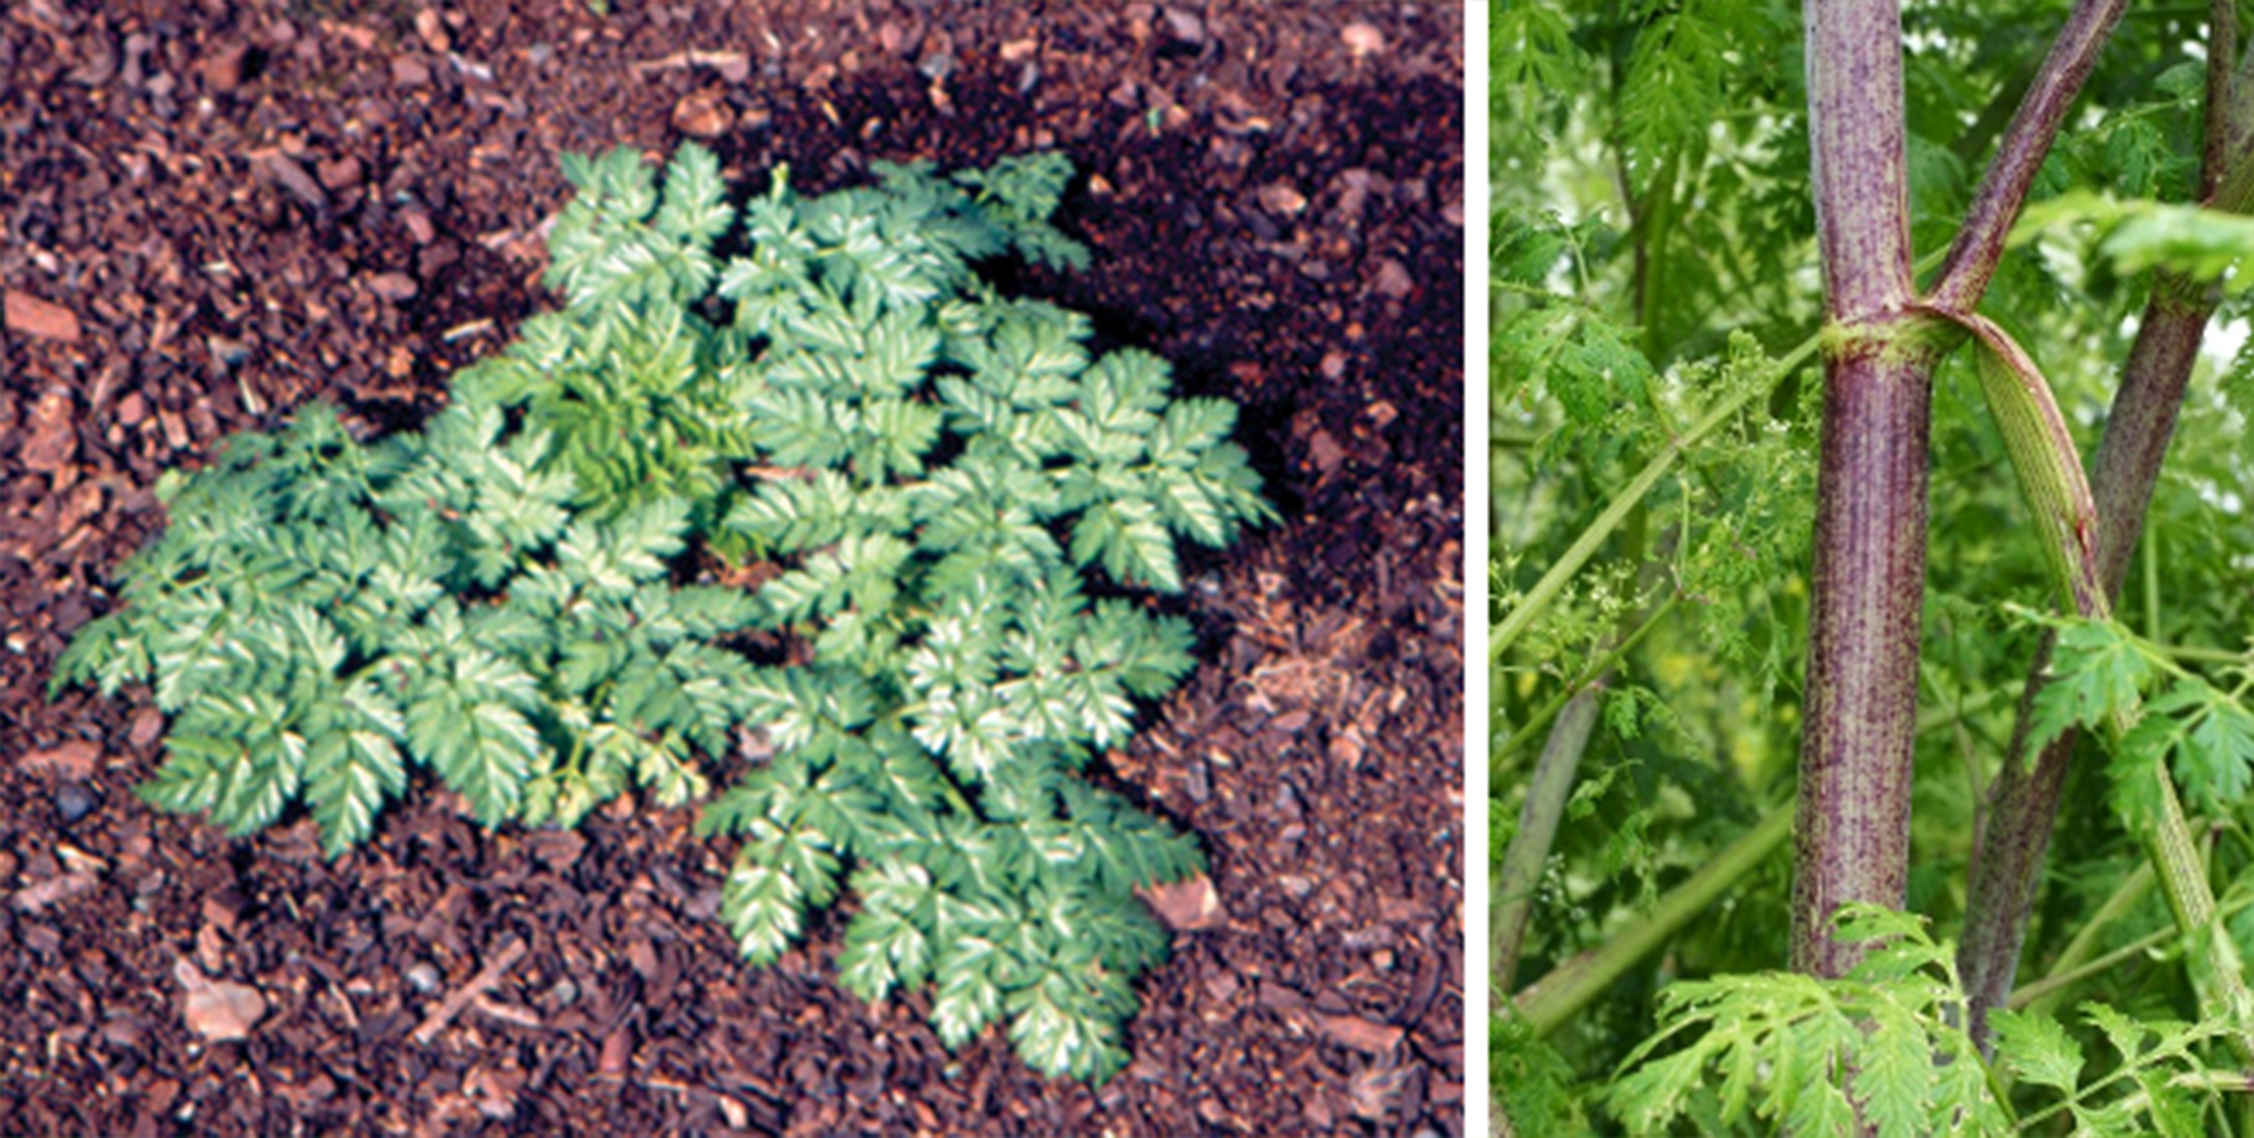 Example images of poison hemlock at various stages.